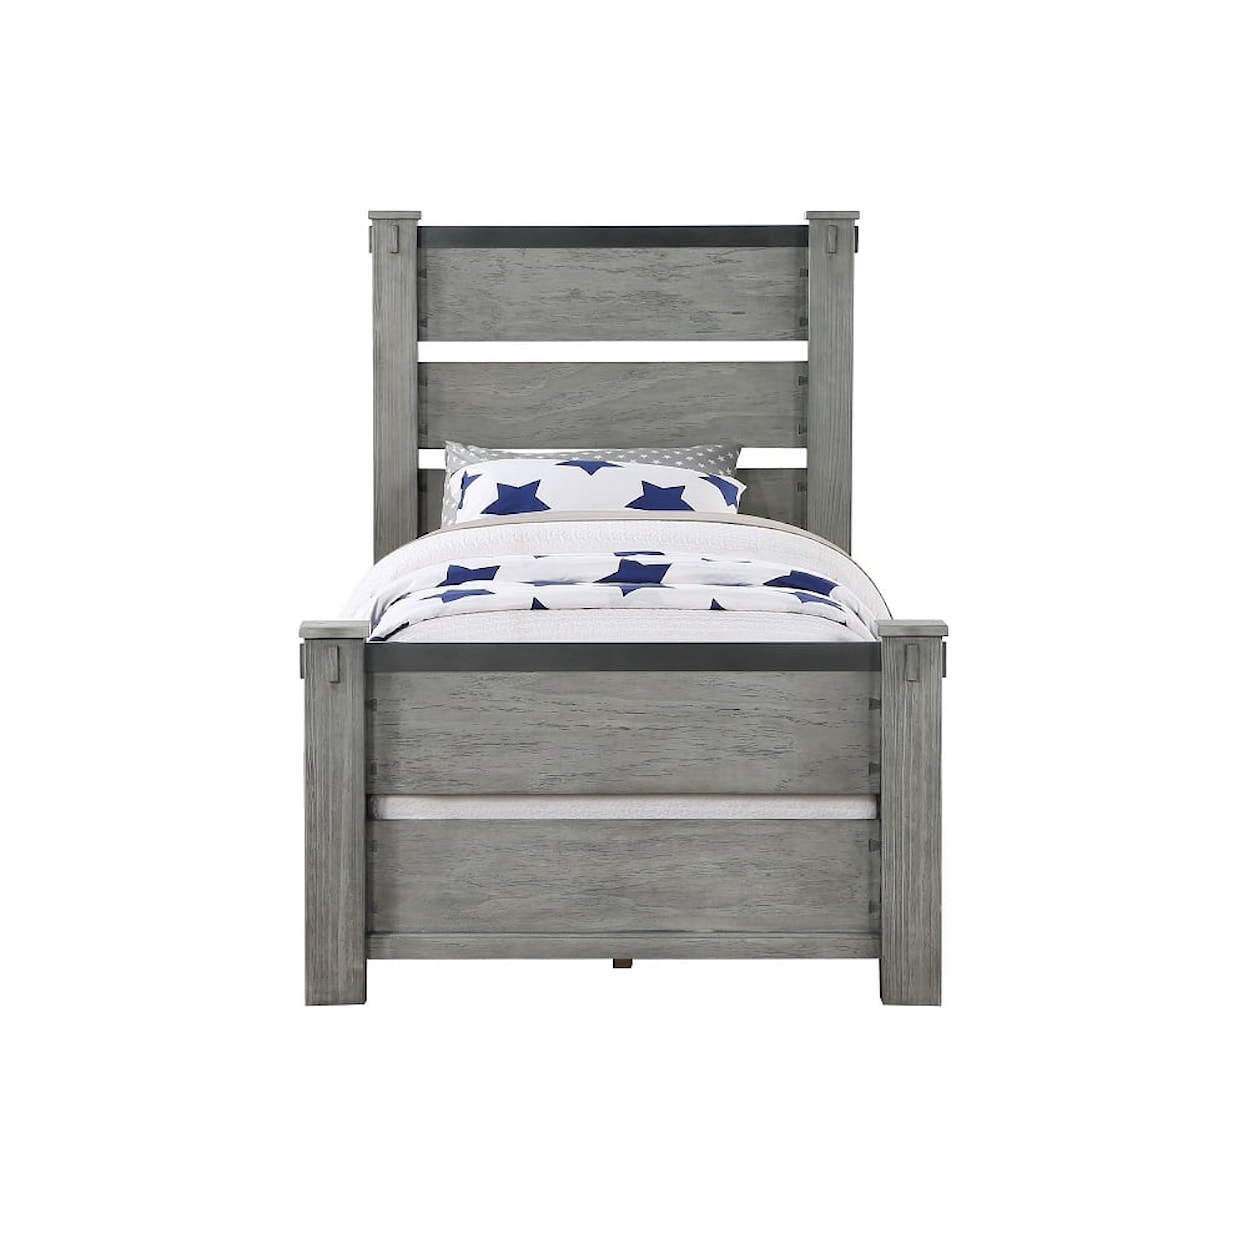 Acme Furniture Veda Twin Bed